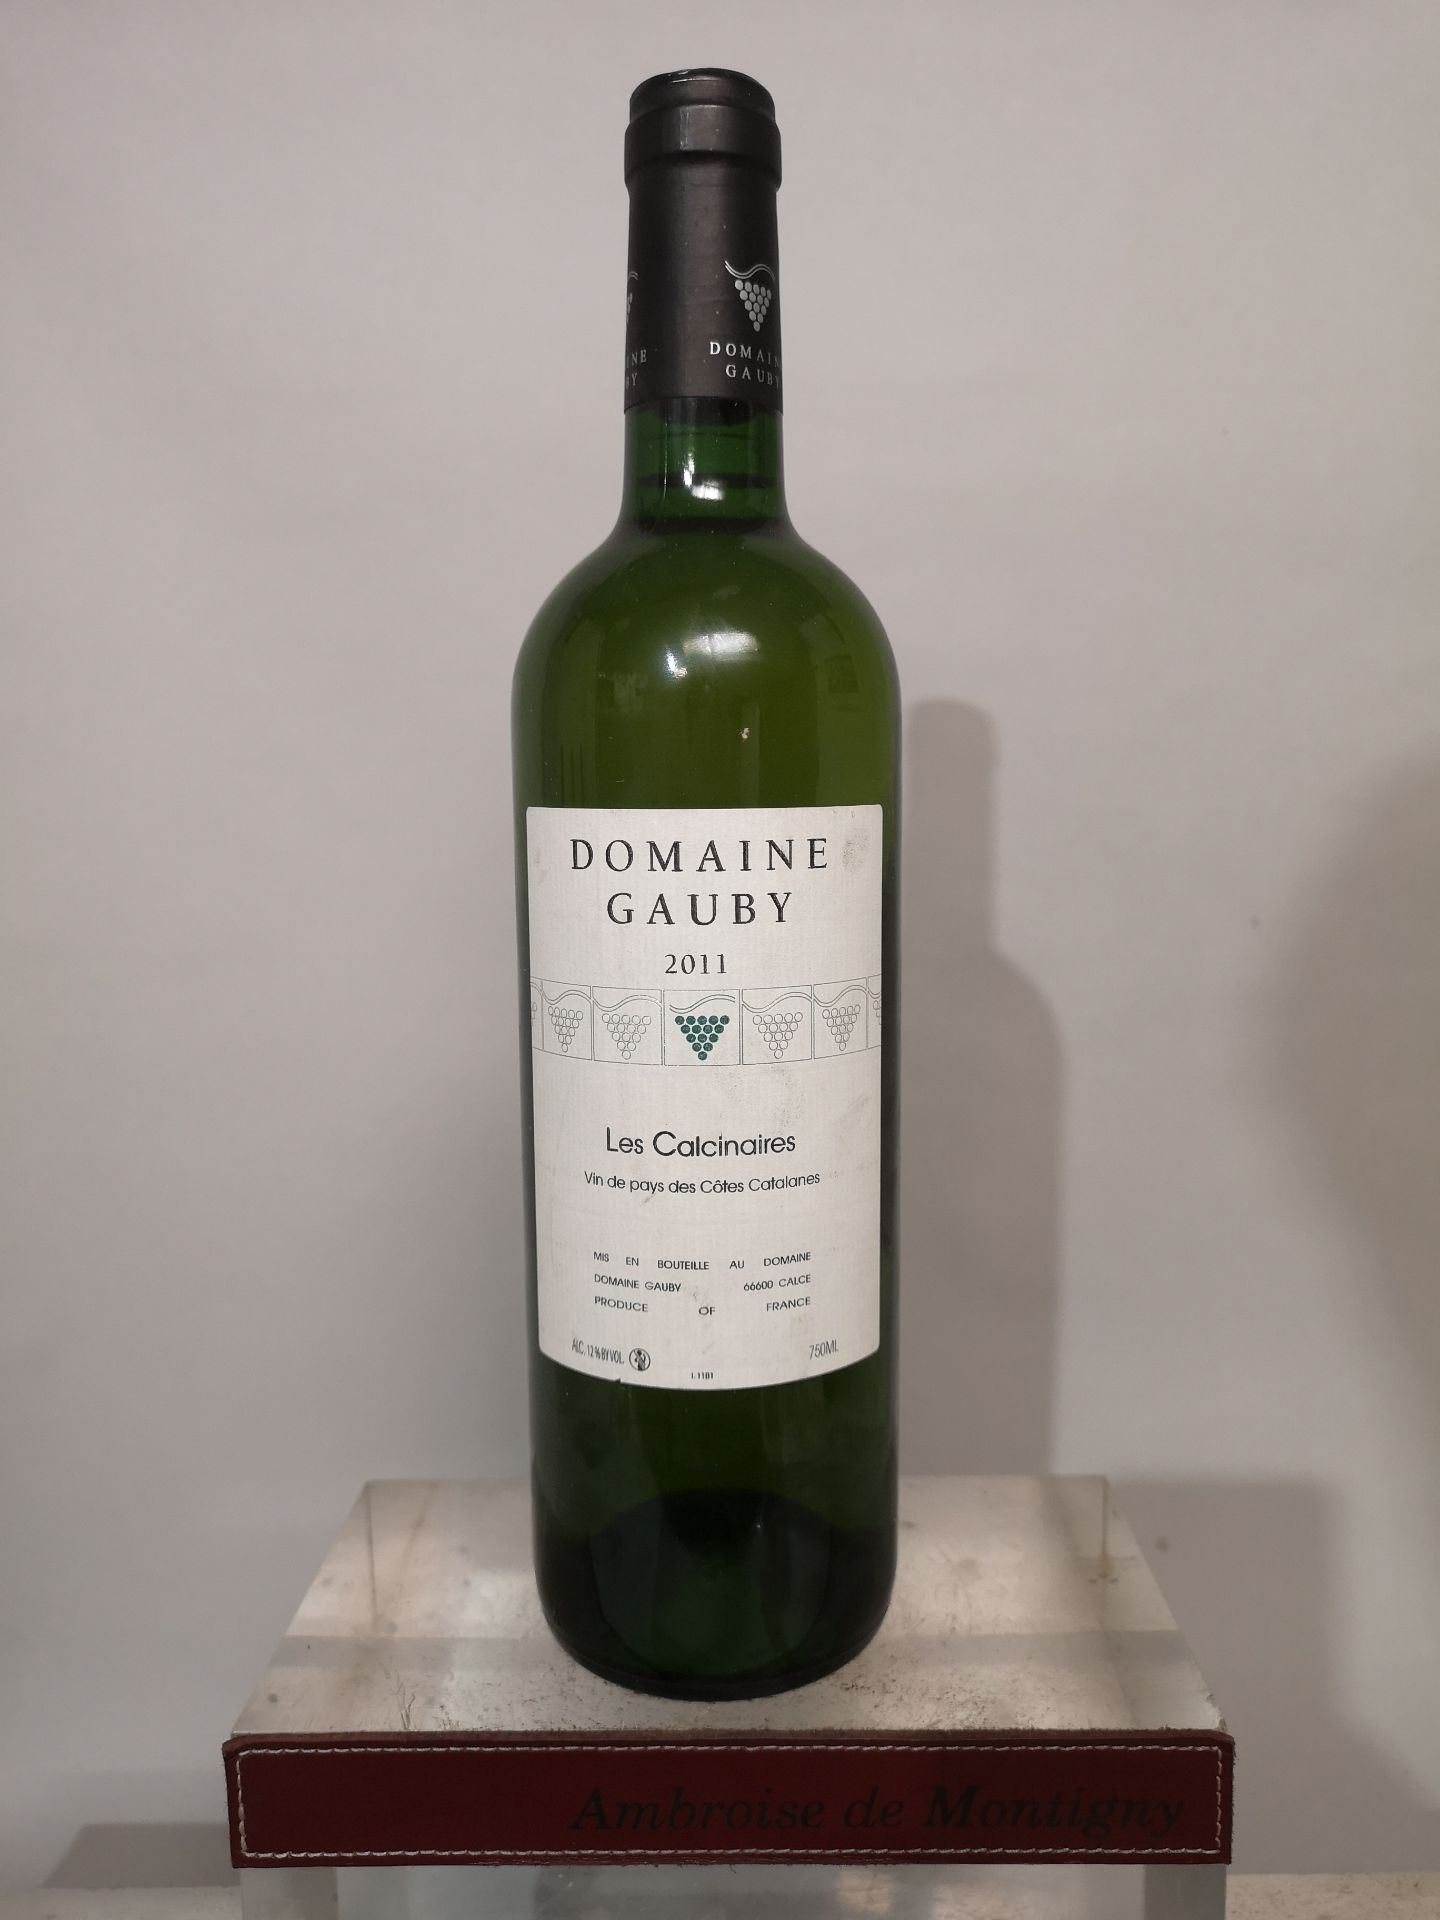 1 GAUBY BLAND DOMAINE BOTTLE "Les Calcinaries" - Catalan coast 2011.Slightly stained label.